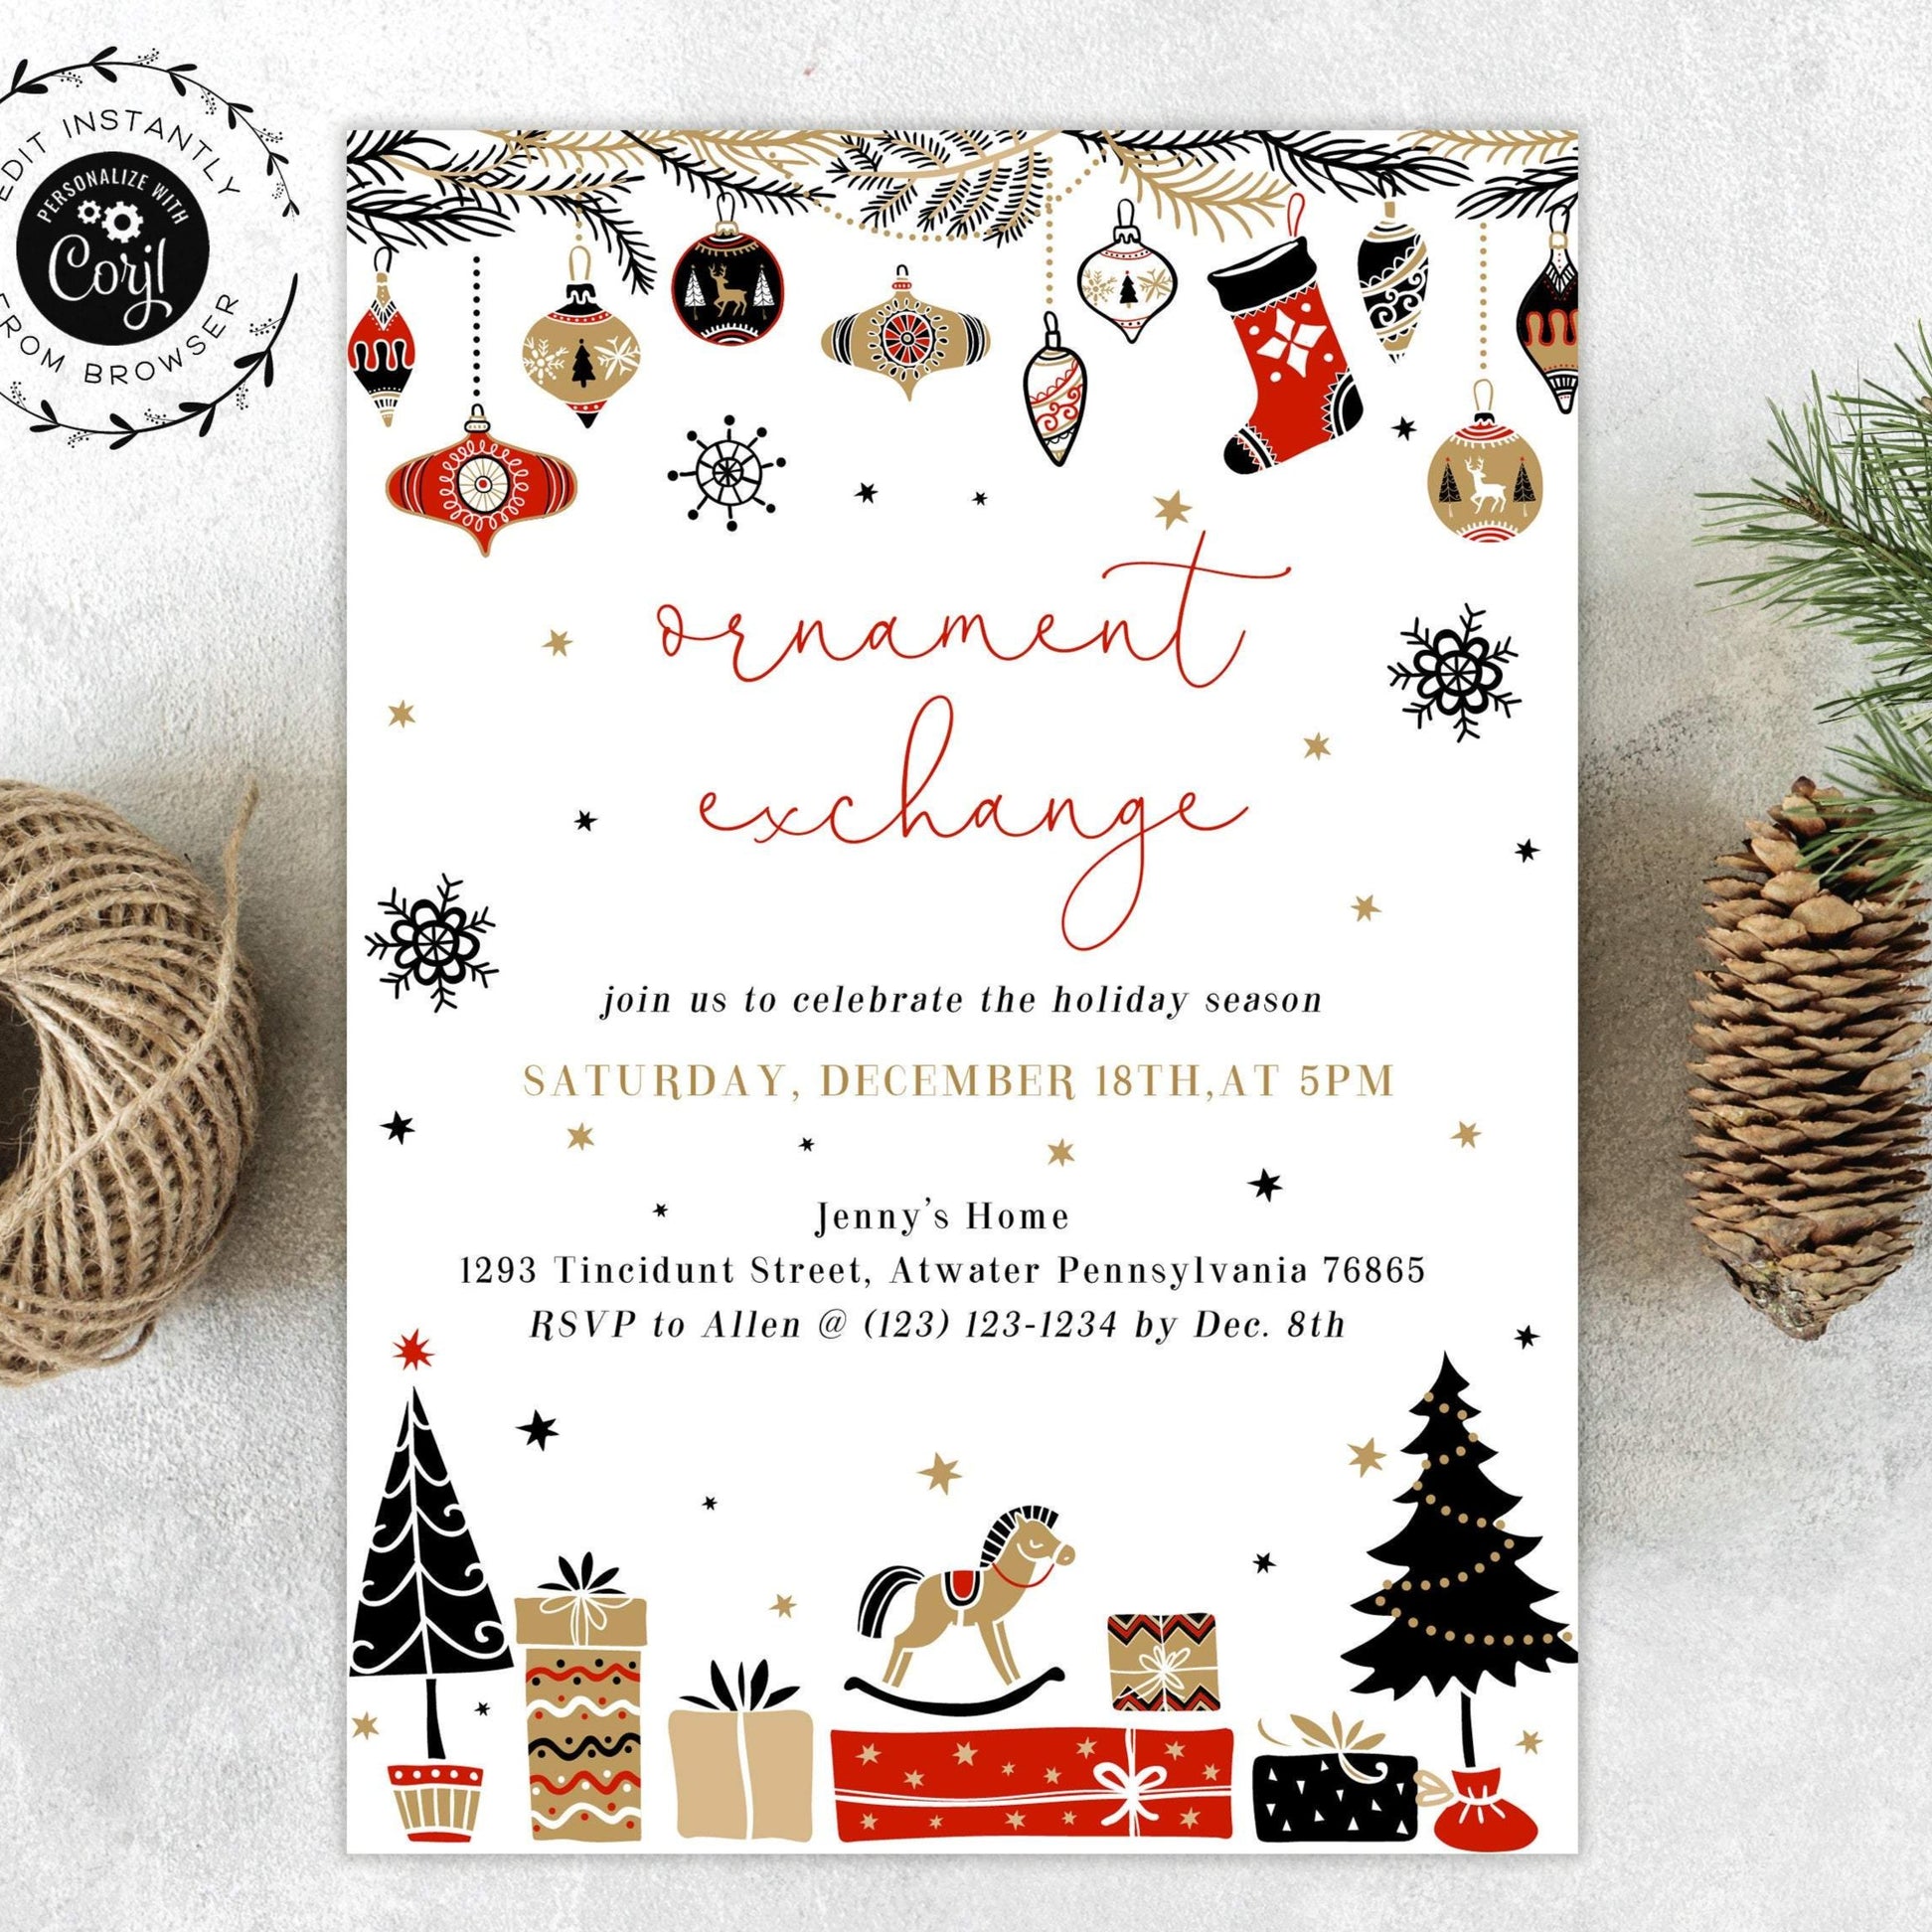 Ornament Exchange Christmas Invitation Template, Holiday Party Invitat ...